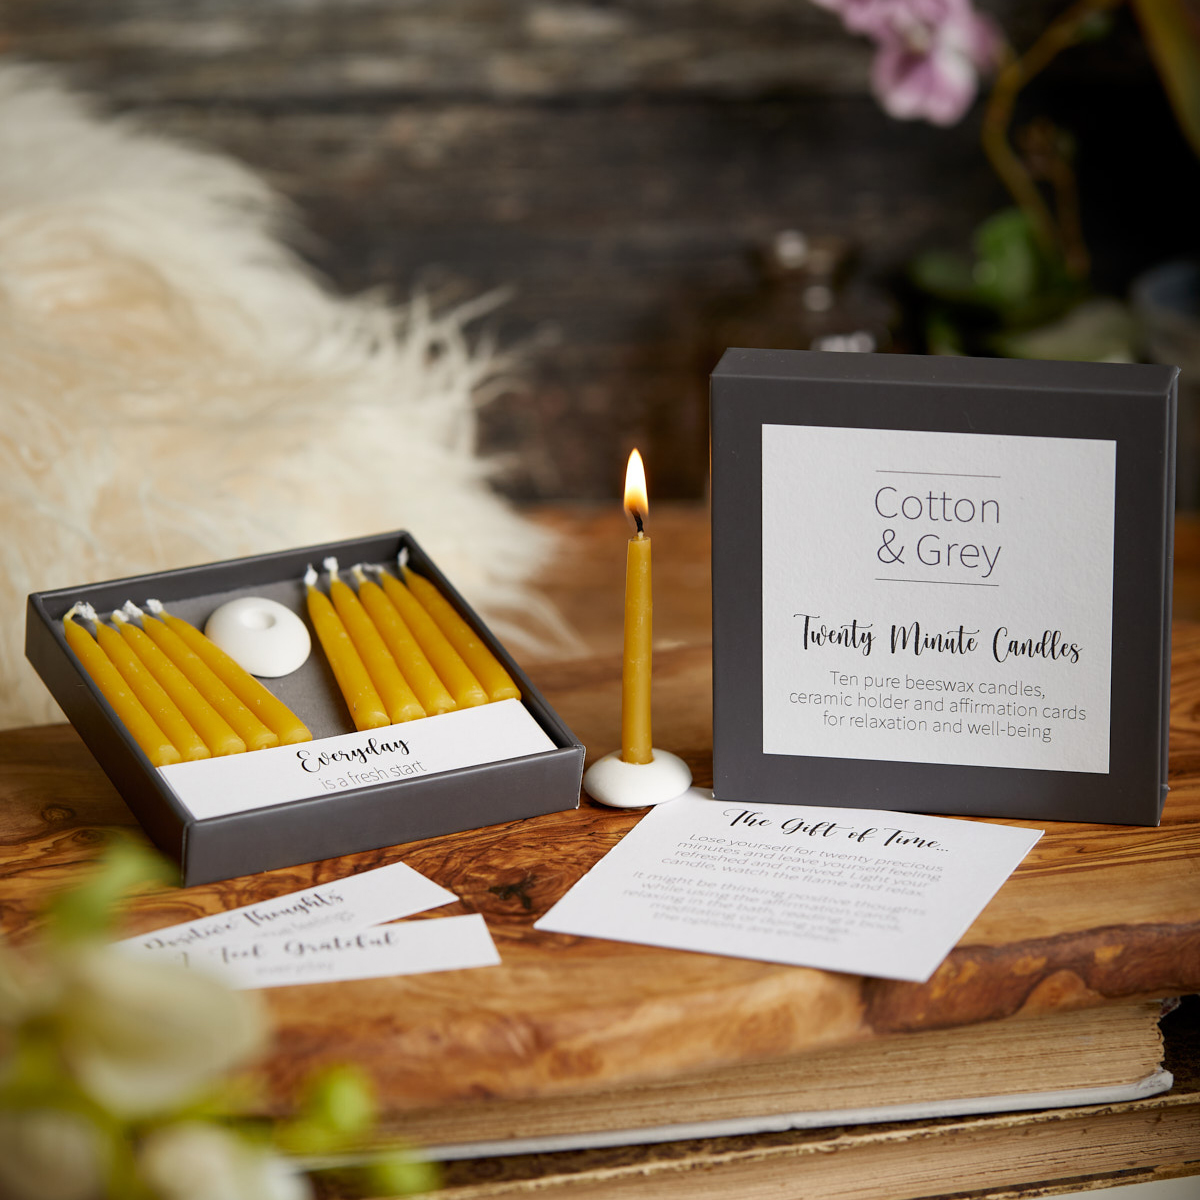 Twenty Minute Candles with Affirmation Cards